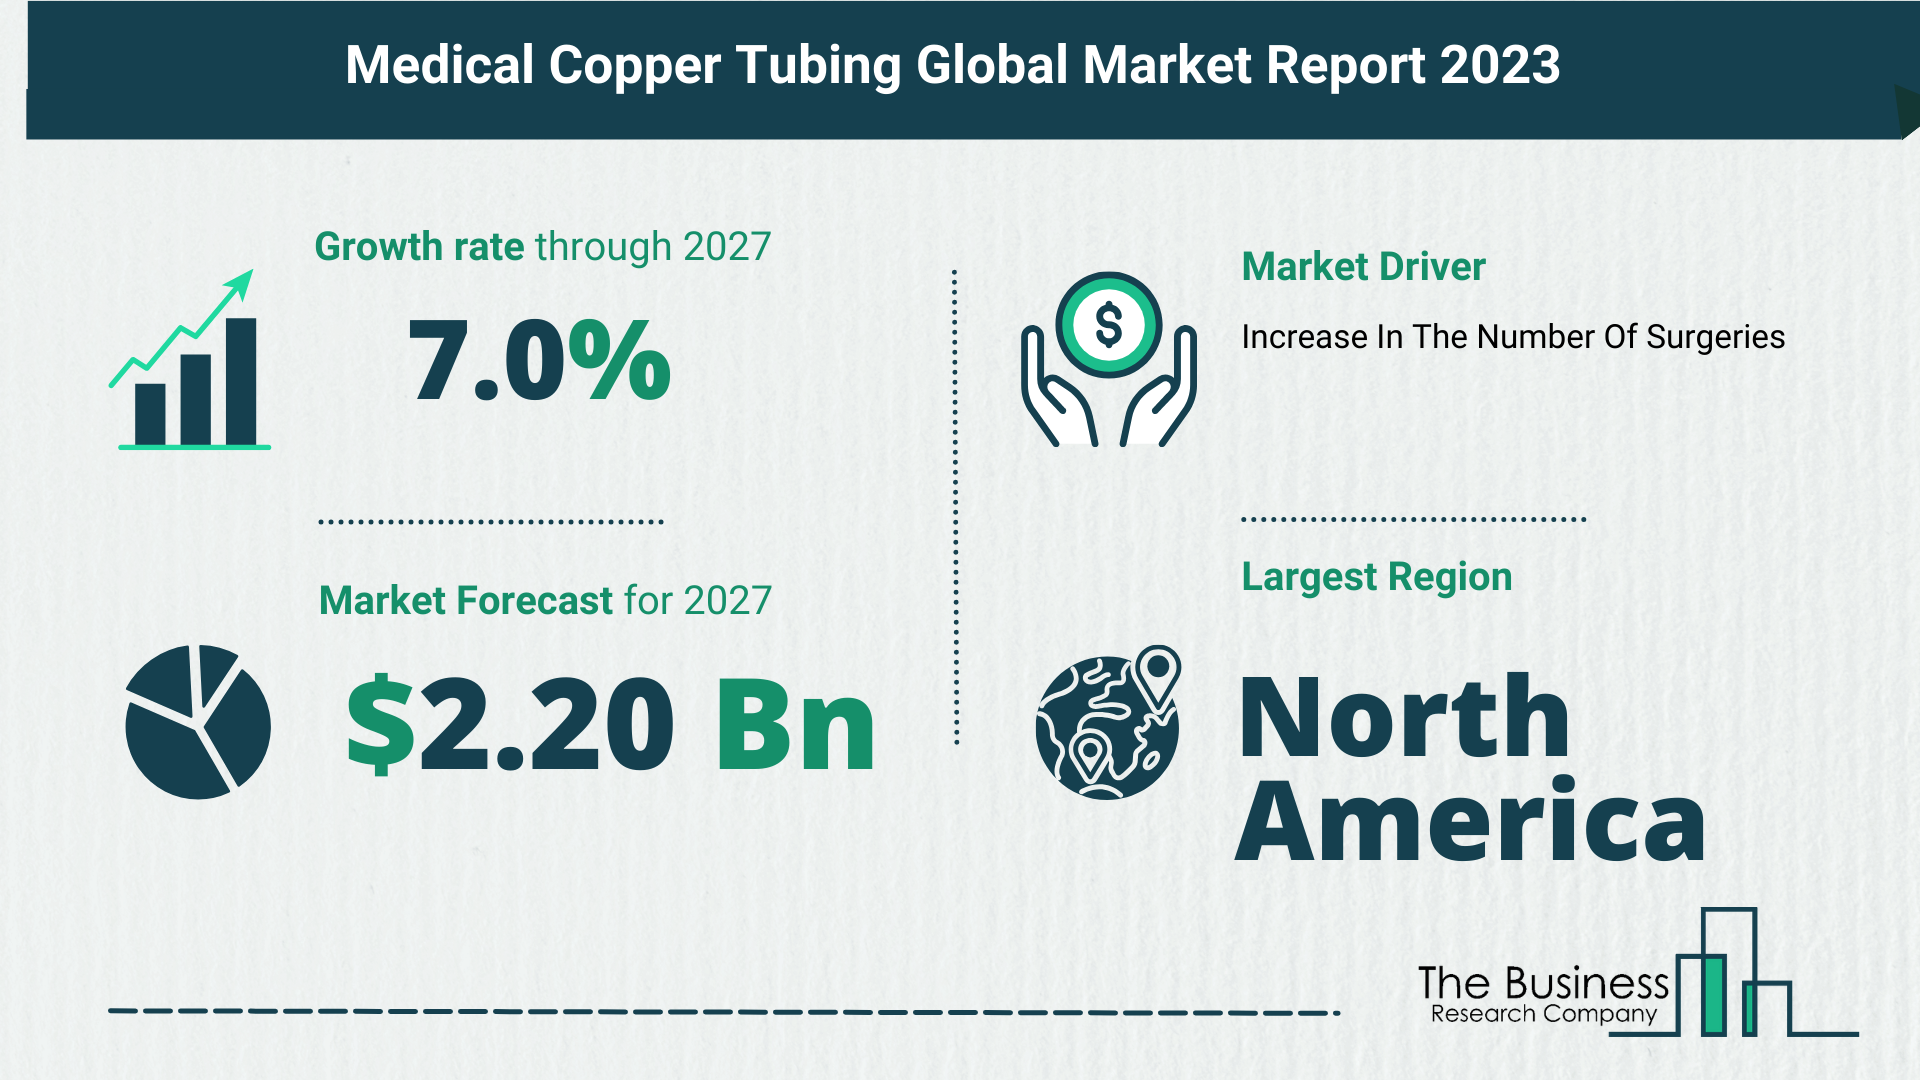 Global Medical Copper Tubing Market Analysis: Estimated Market Size And Growth Rate